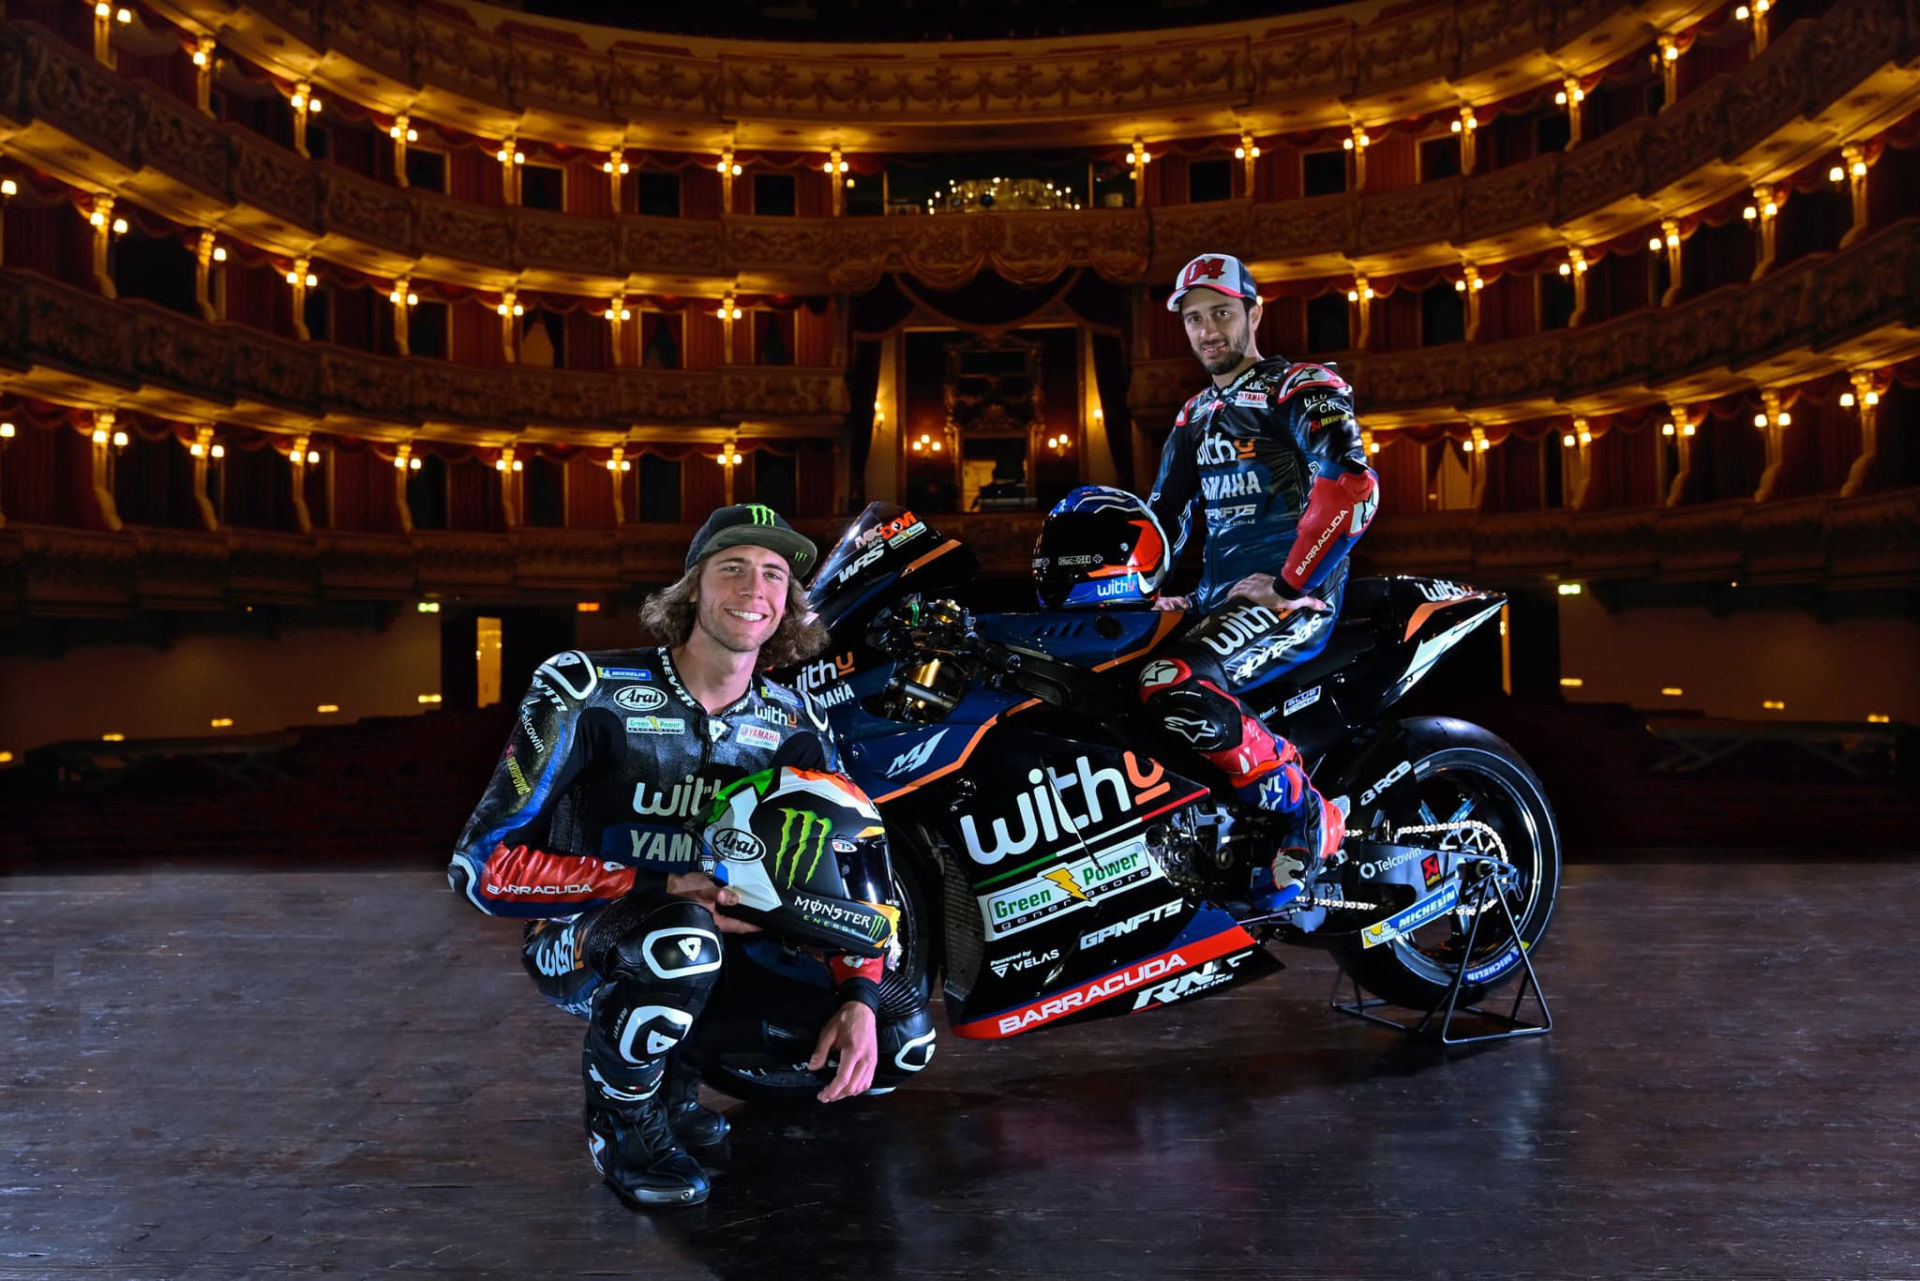 WithU Yamaha RNF MotoGP Racing riders Darryn Binder (left) and Andrea Dovizioso (right) at the Philharmonic Theater in Verona, Italy. Photo courtesy WithU Yamaha RNF MotoGP Racing.